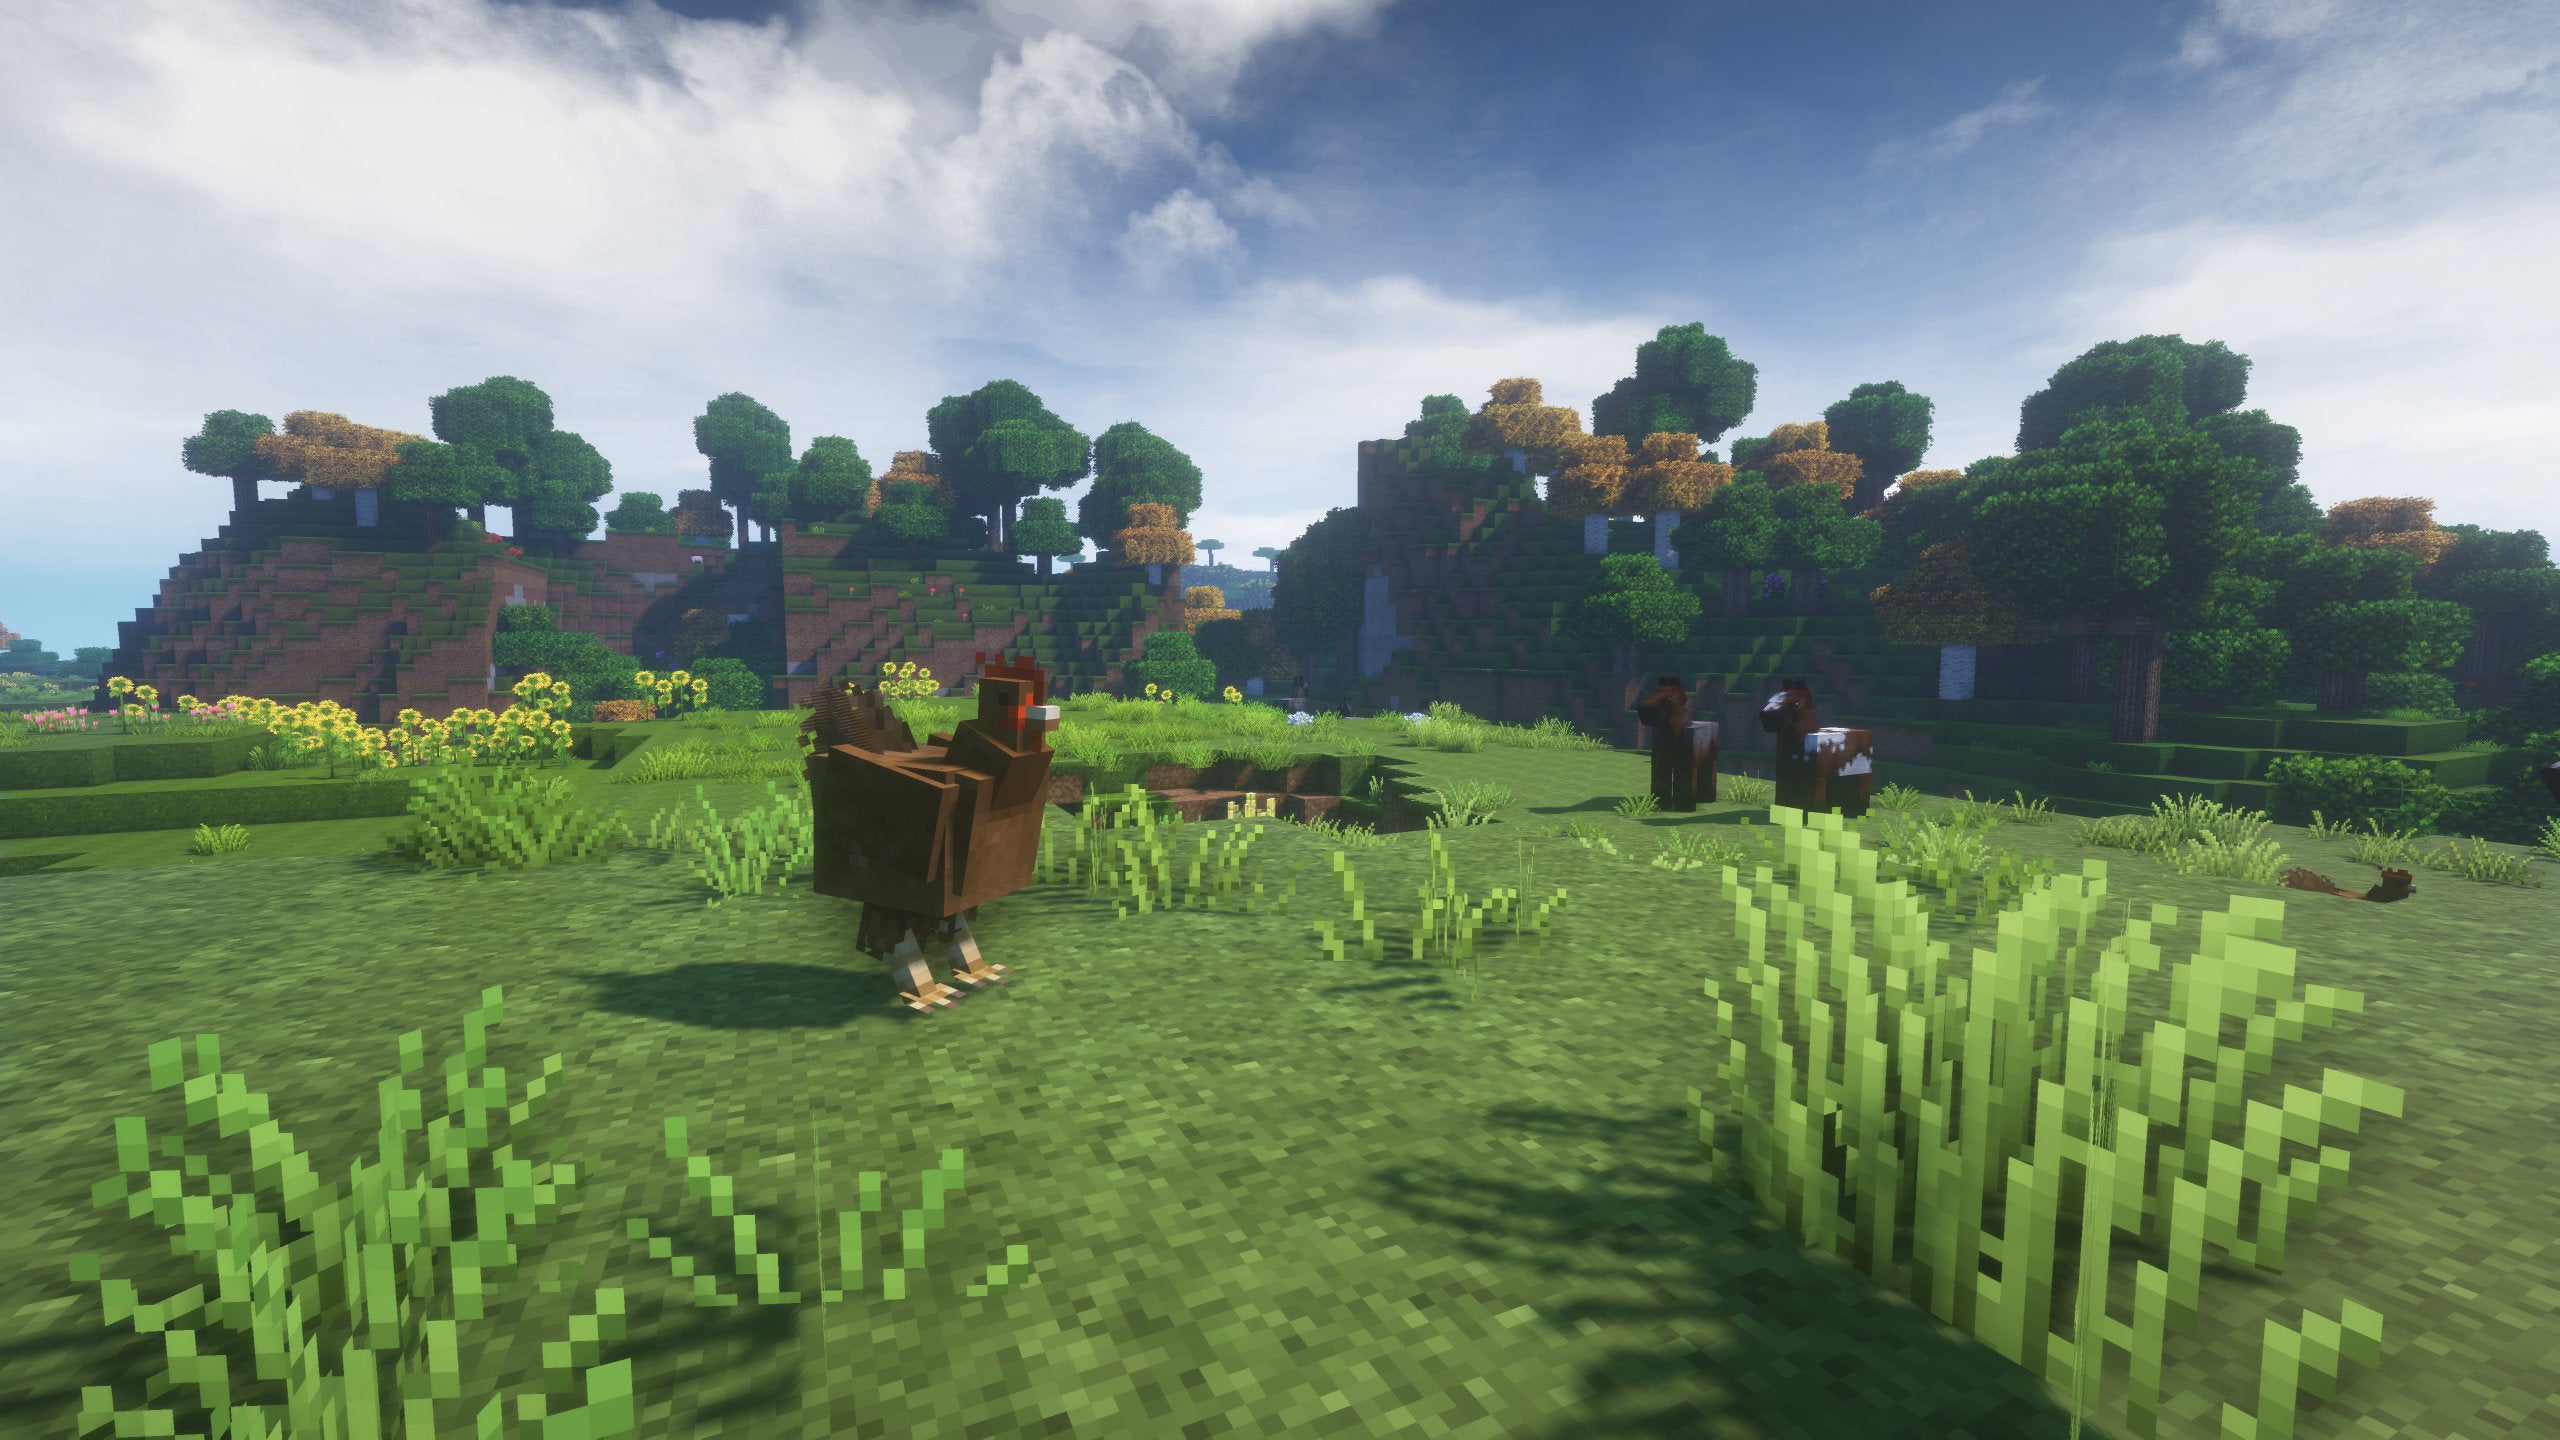 A Minecraft screenshot of a landscape displayed using the Epic Adventures Texture Pack.